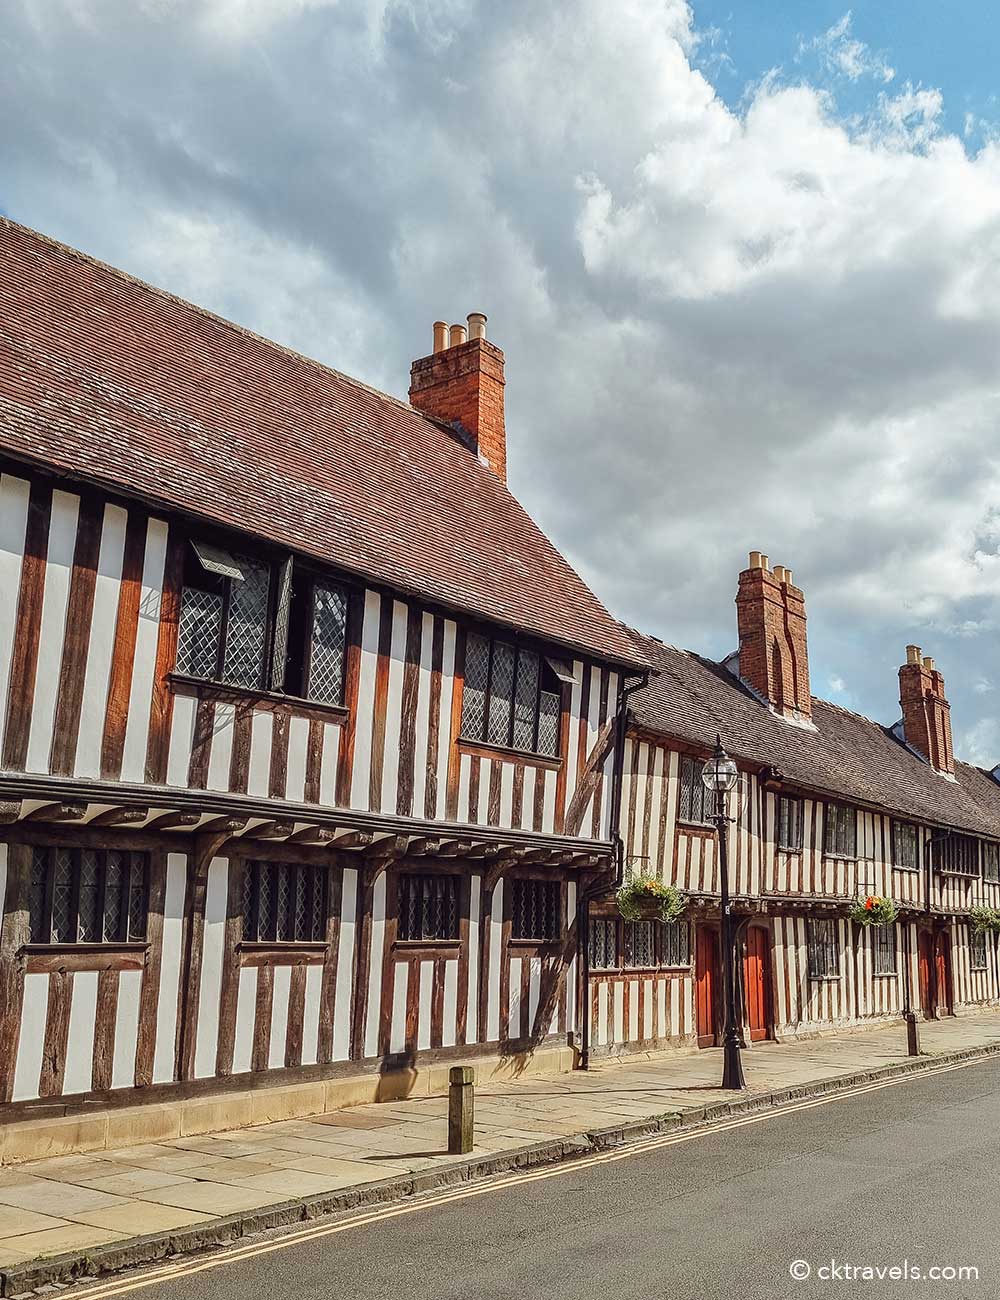 Shakespeare’s Schoolroom and Guildhall Stratford-upon-Avon